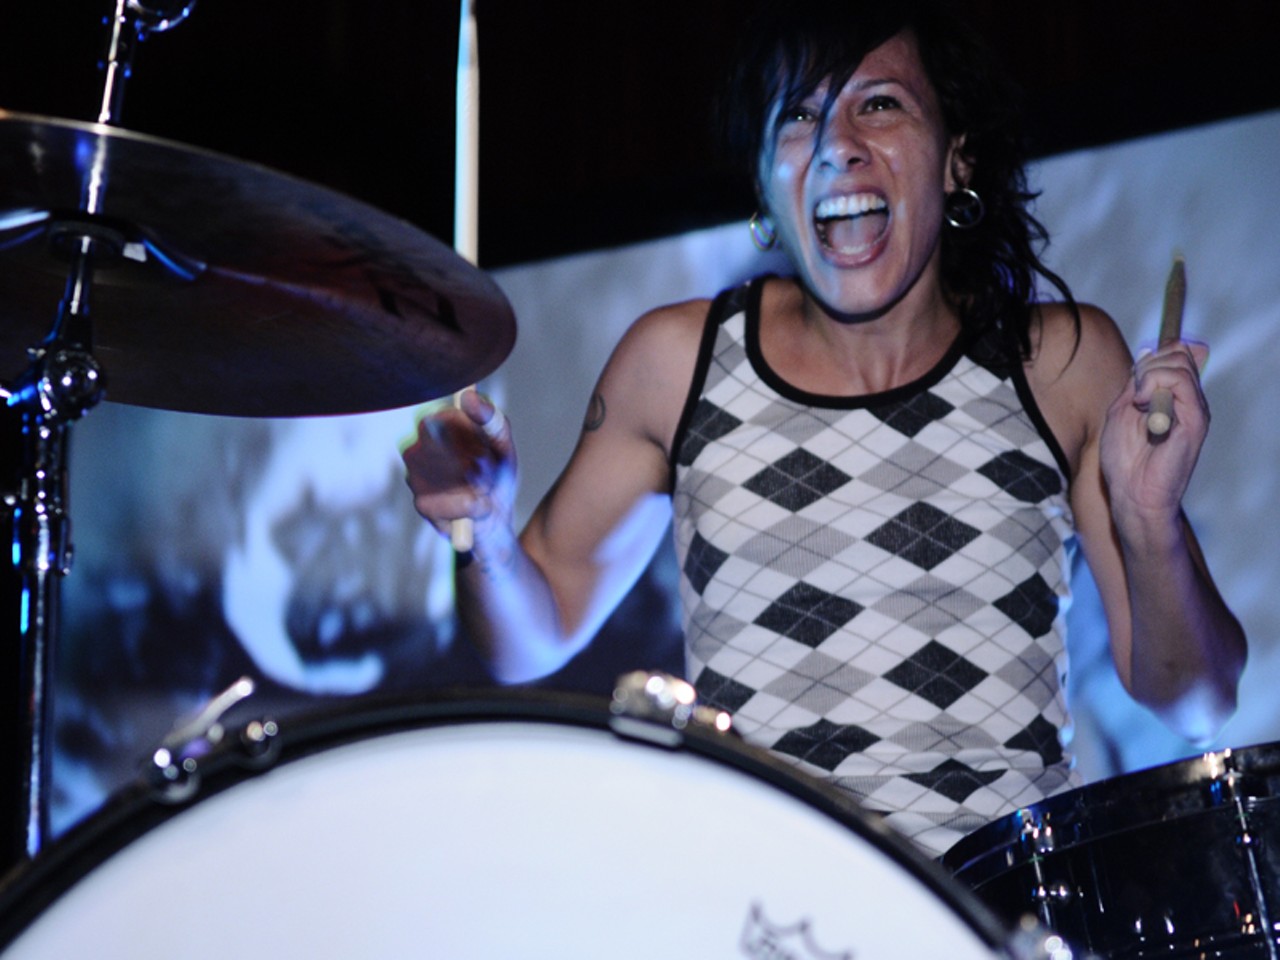 Kim Schifino of Matt and Kim, who smiles all the time. See more photos from the show Matt and Kim show on August 23 right here.